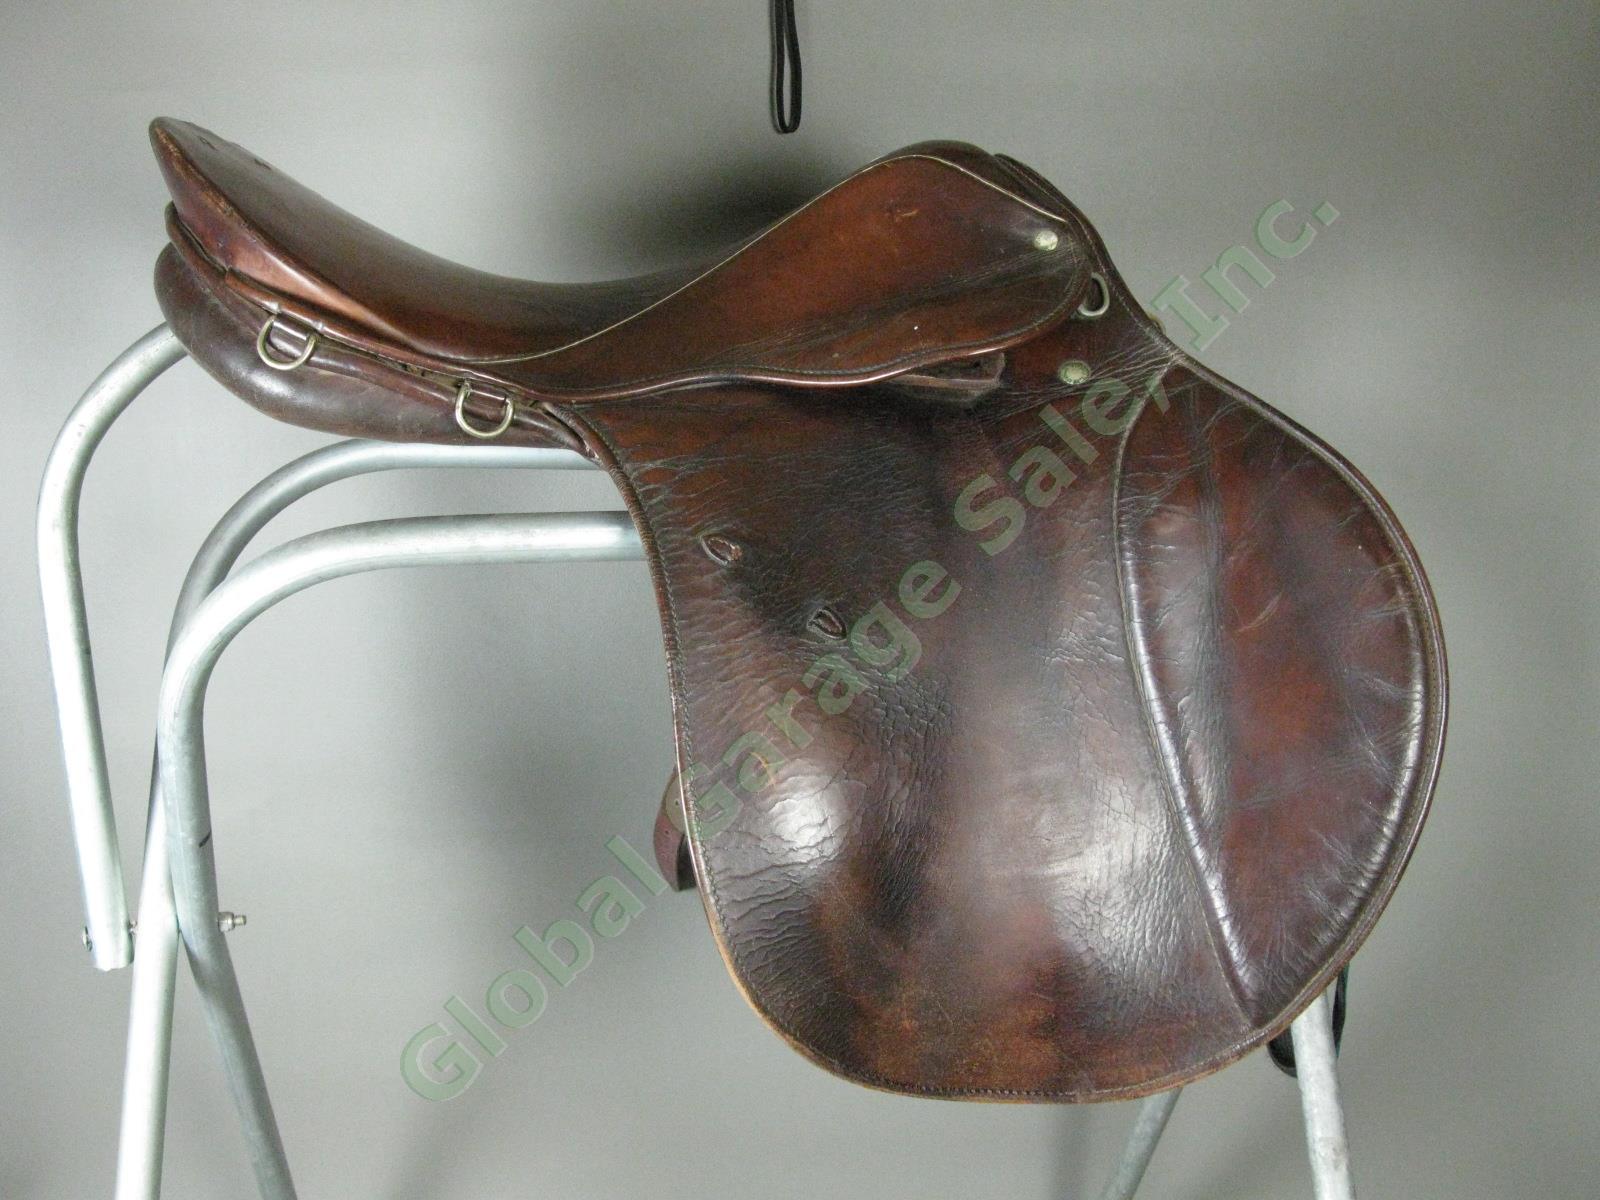 Stubben Parzival 18.5" English Dressage Saddle 34497 31" Tree Made In Germany NR 4